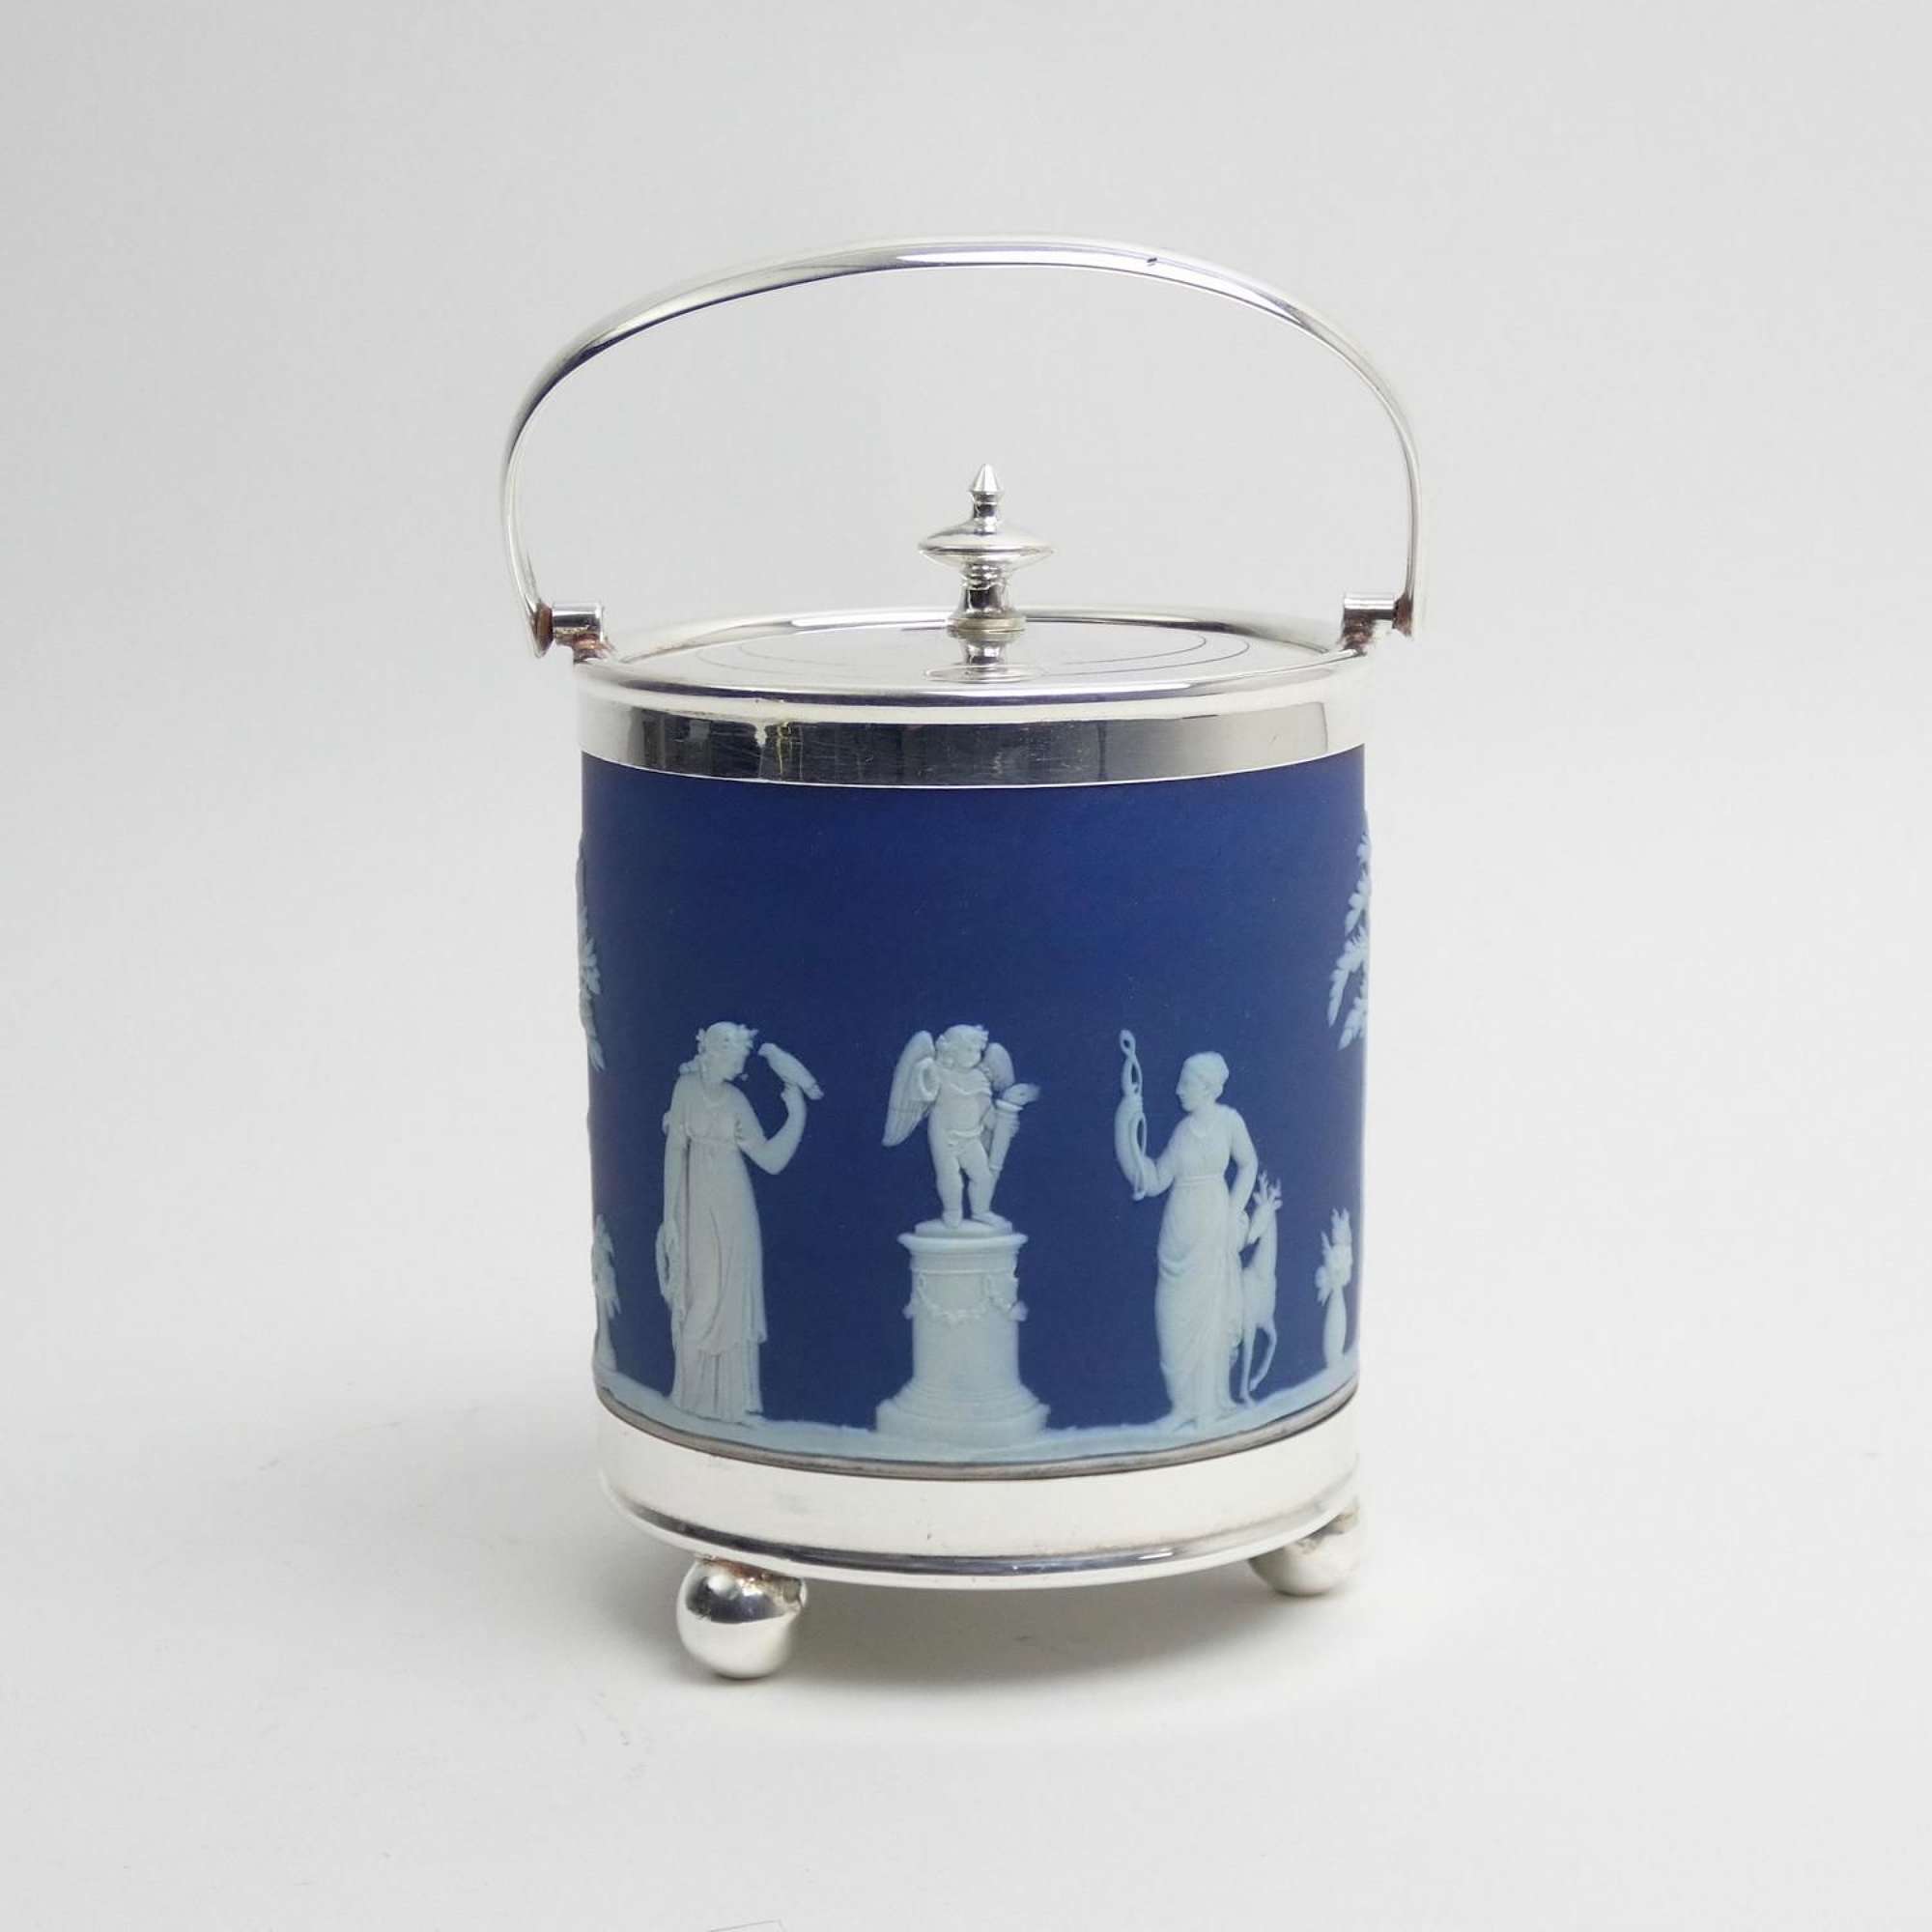 Small biscuit barrel